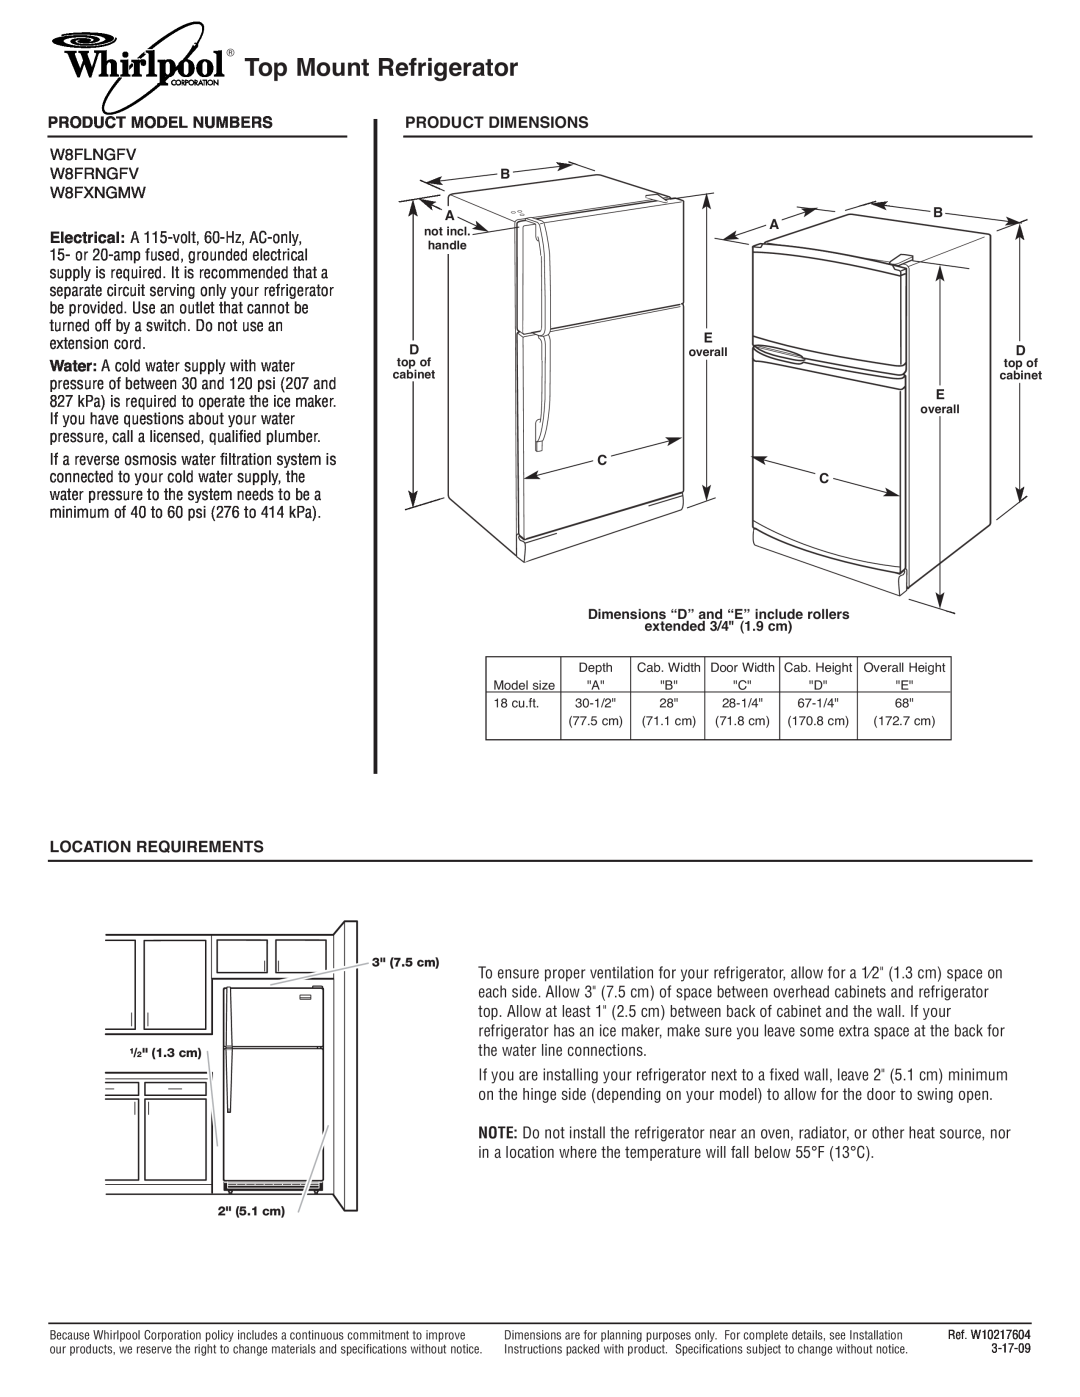 Whirlpool dimensions Top Mount Refrigerator, Product Model Numbers, W8FLNGFV W8FRNGFV W8FXNGMW, Product Dimensions 